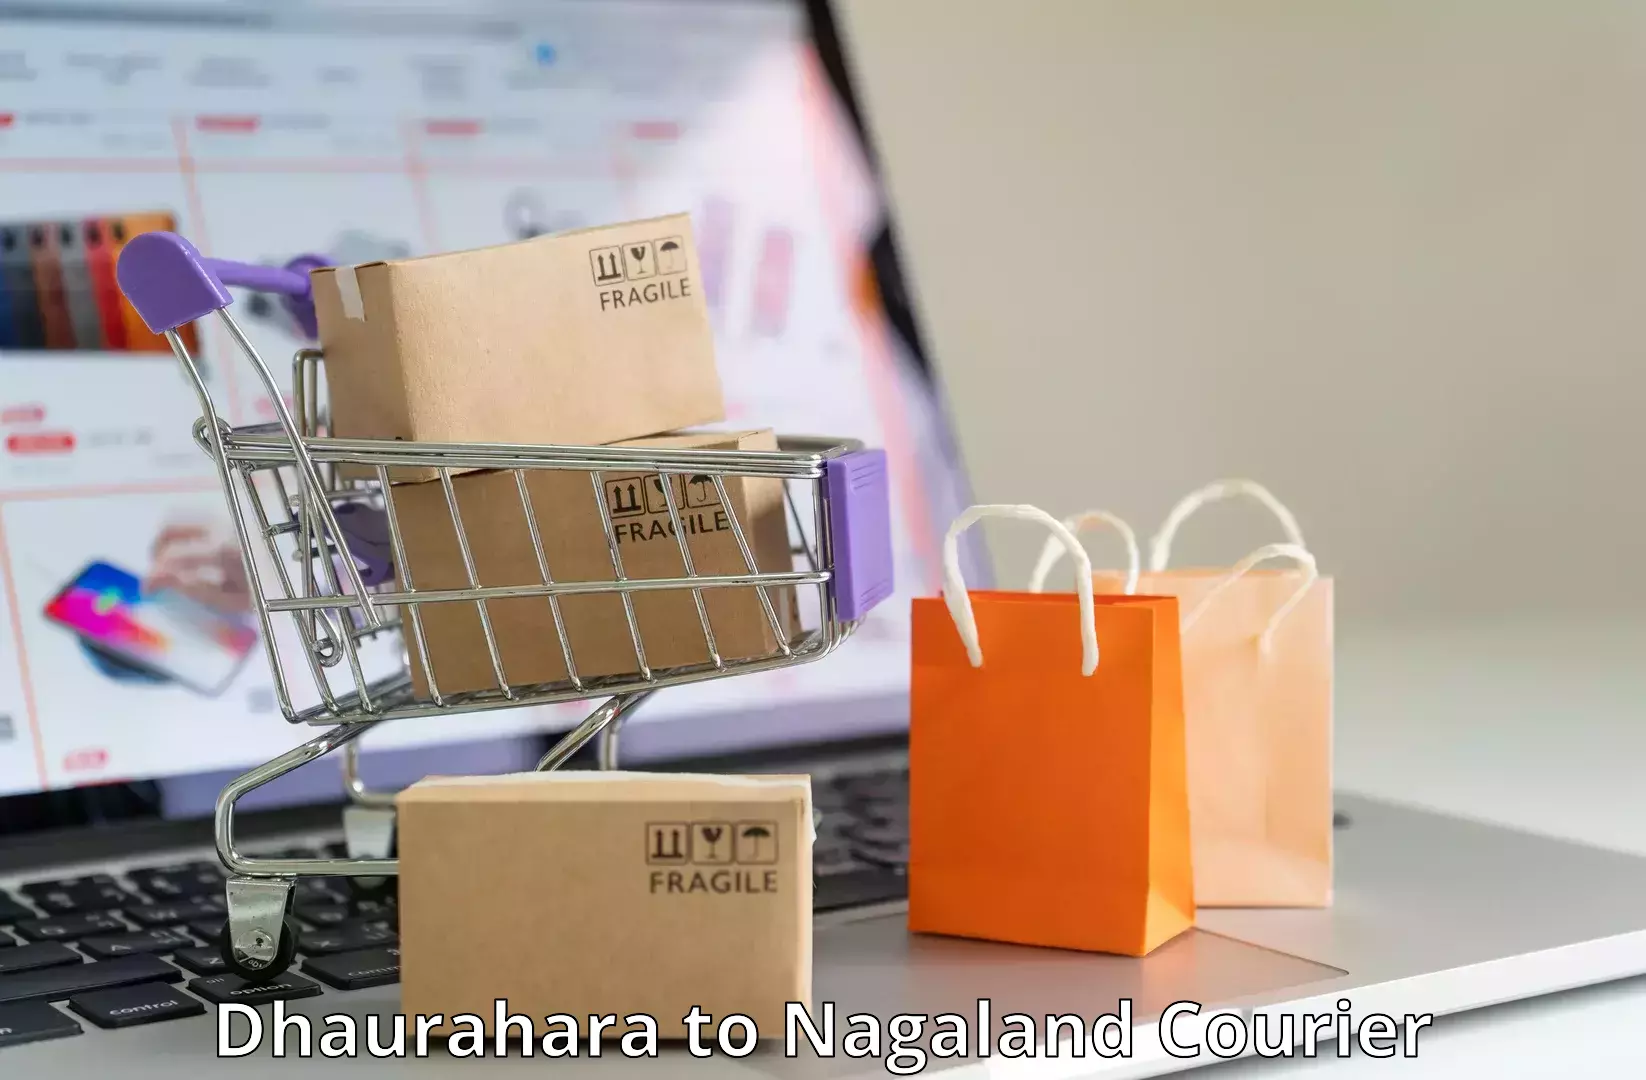 Courier service innovation Dhaurahara to Mon